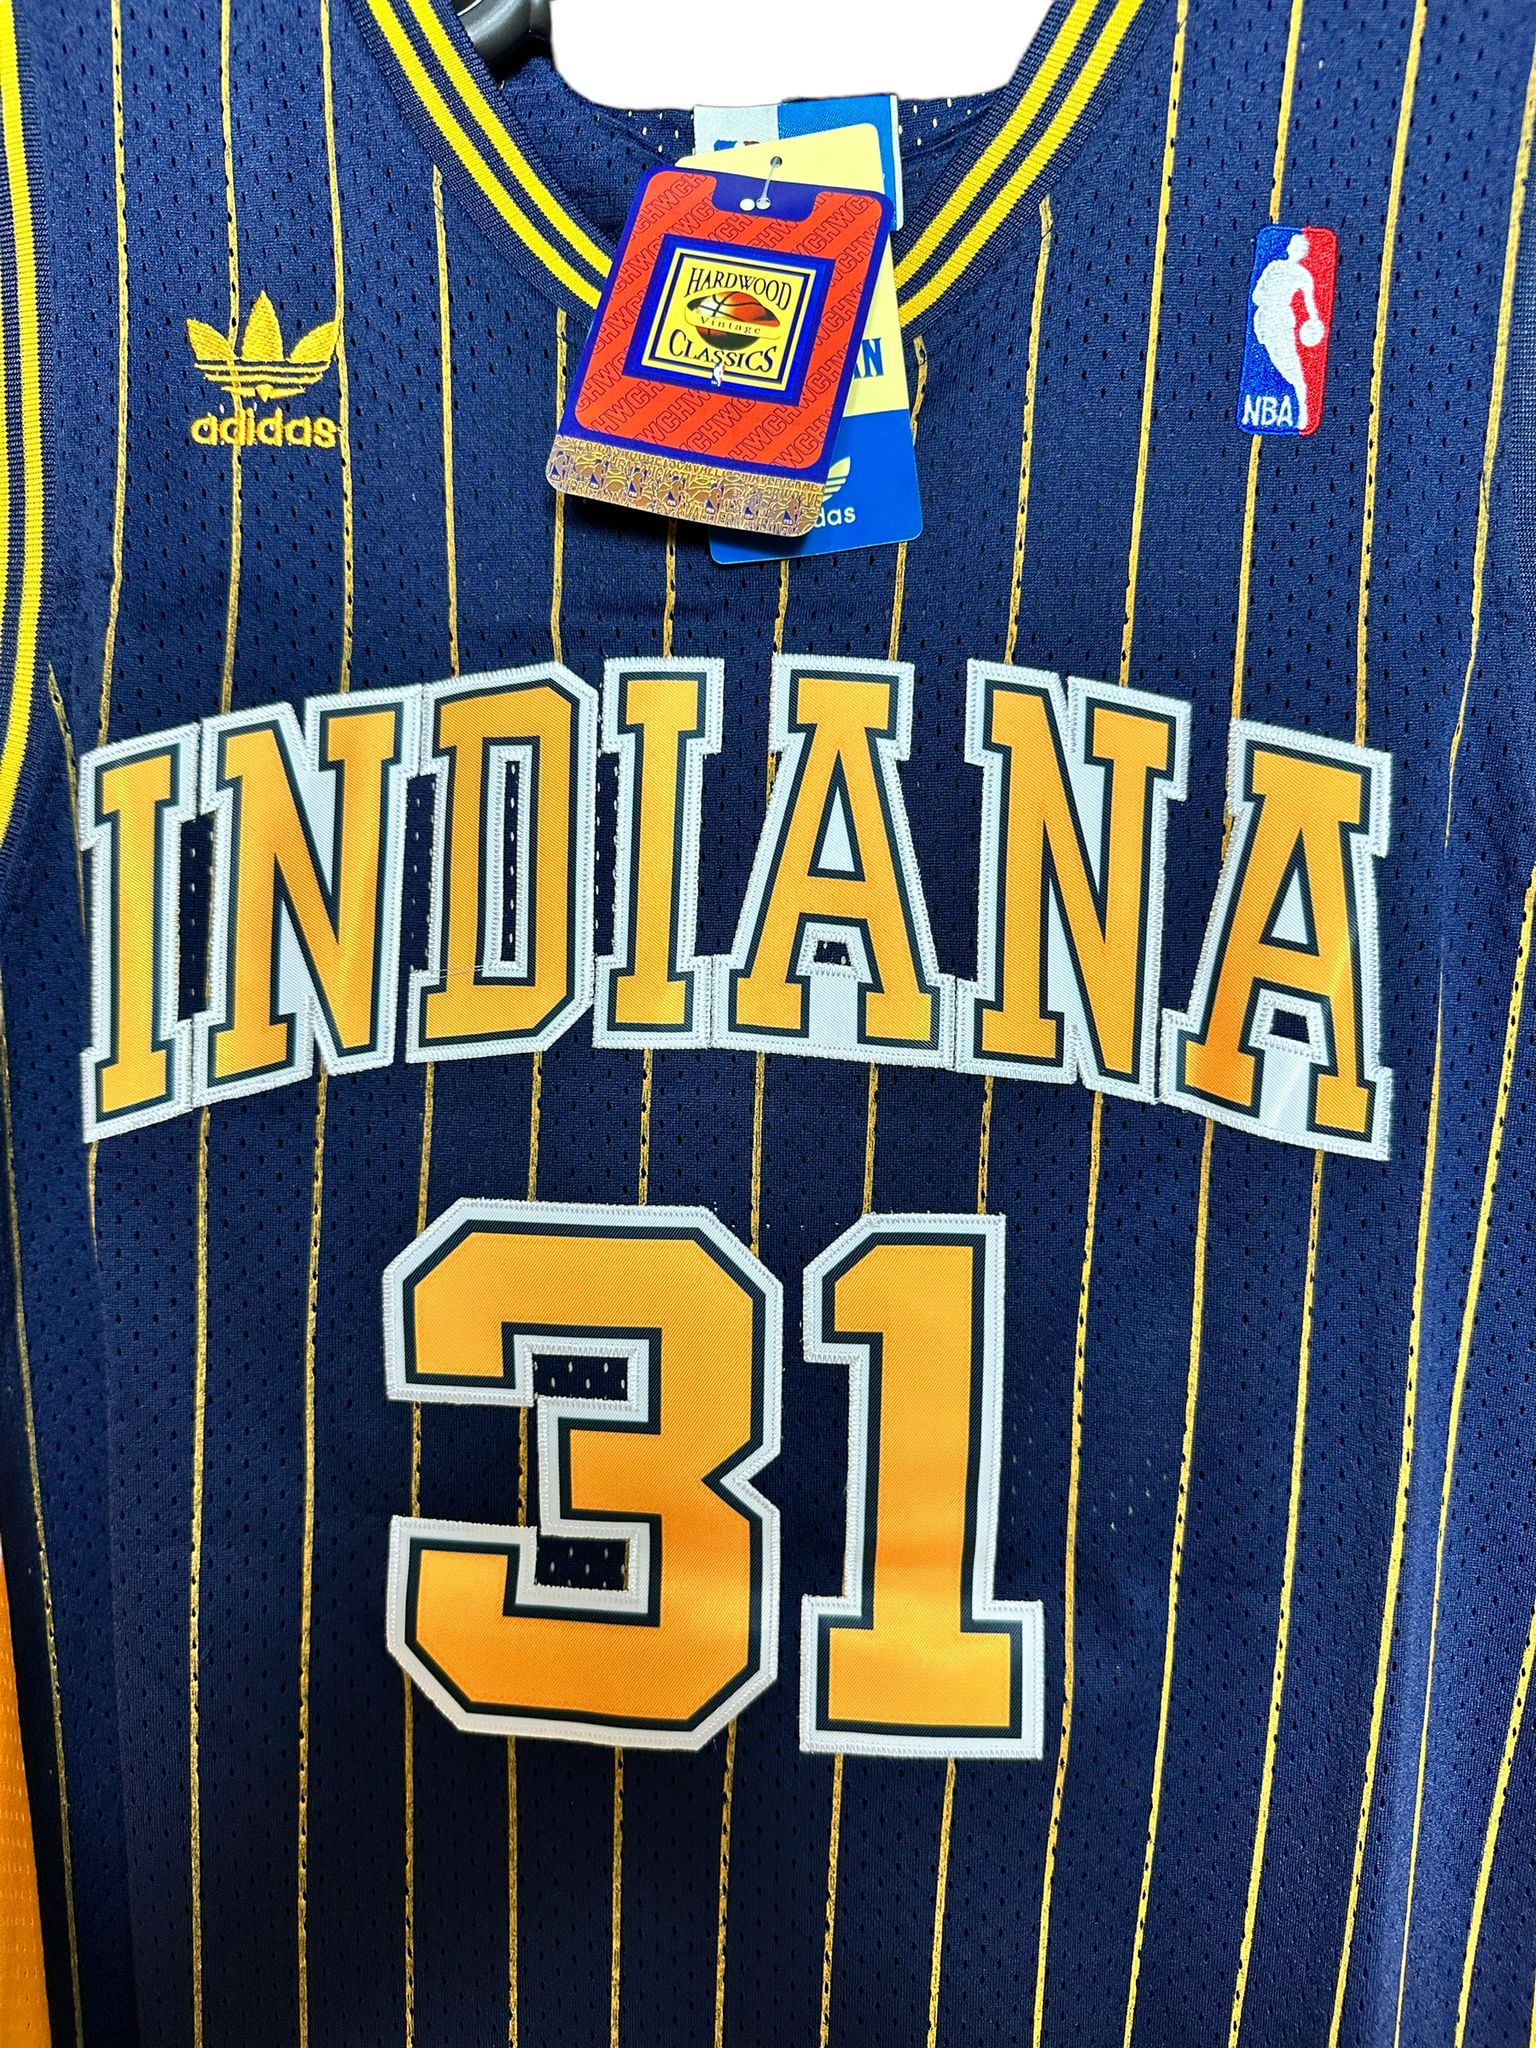 Reggie Miller Indiana Pacers Throwback Basketball Jersey